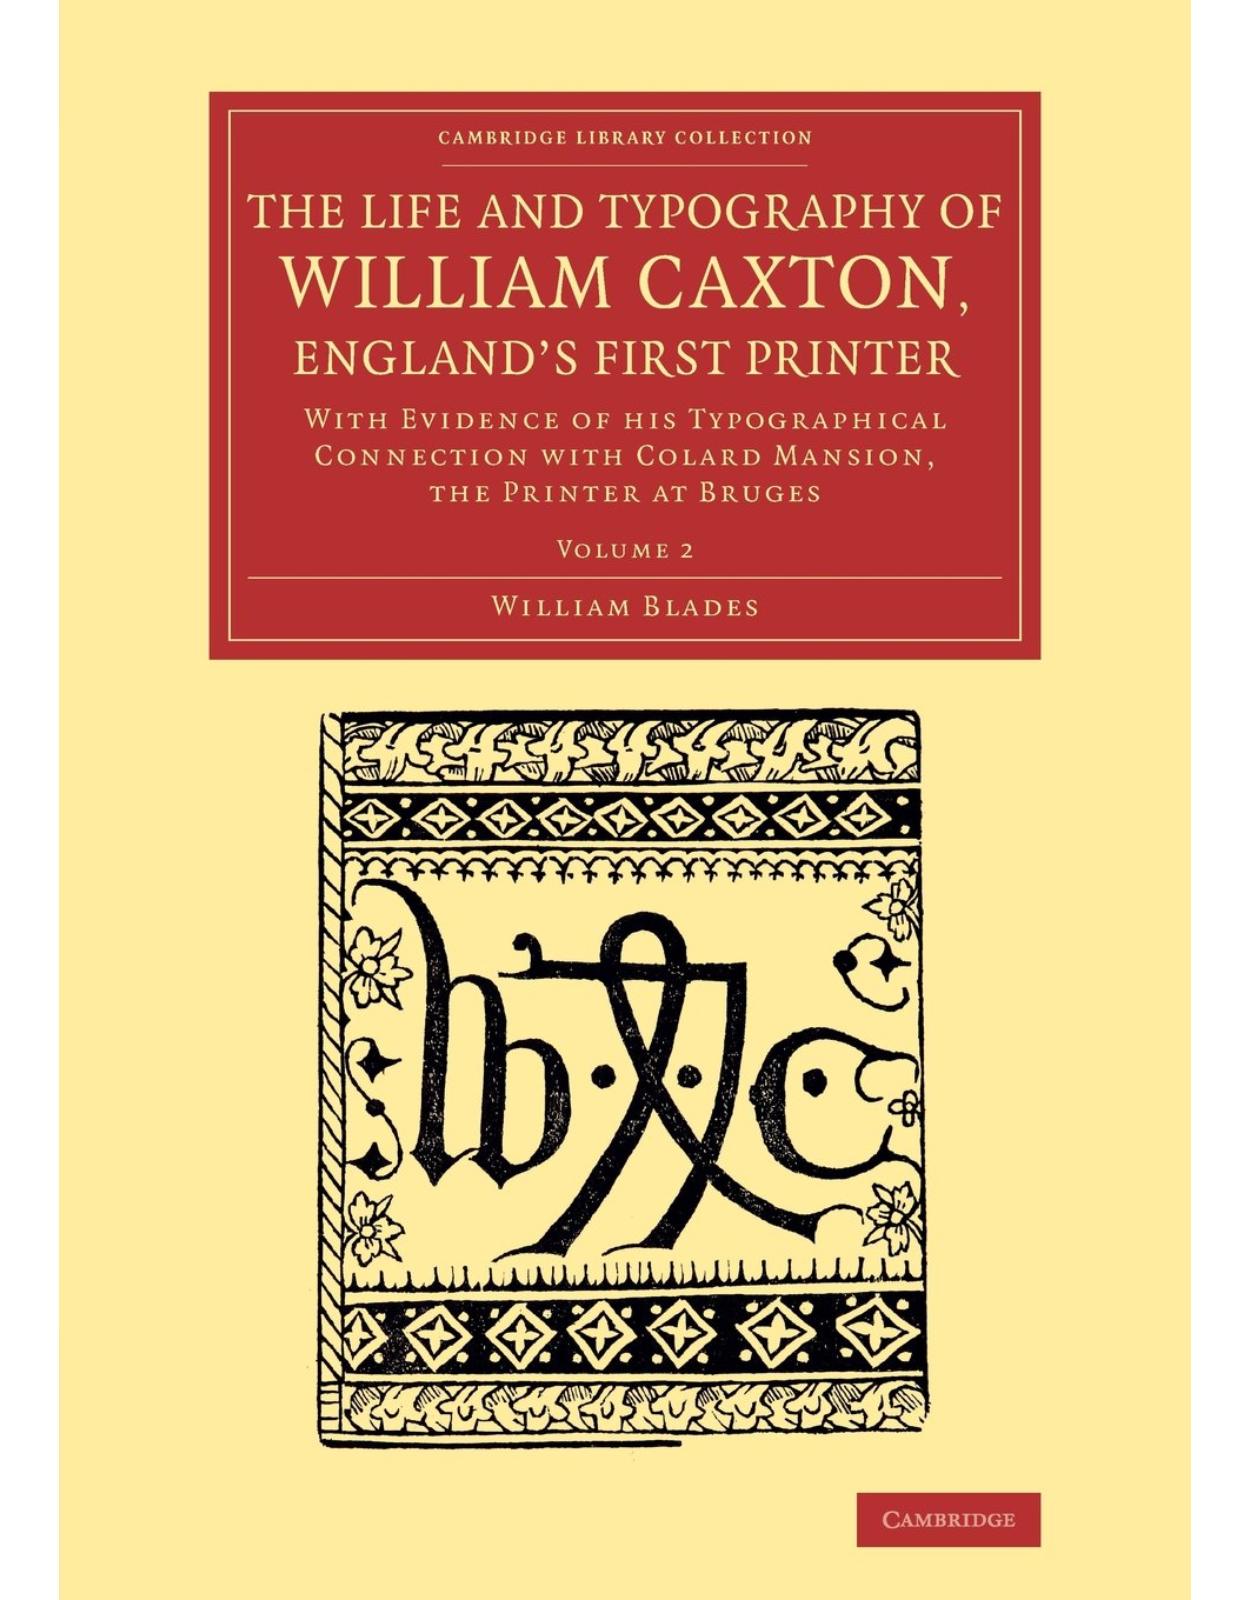 The Life and Typography of William Caxton, England's First Printer 2 Vol,ume Set: The Life and Typography of William Caxton, England's First Printer: ... of Printing, Publishing and Libraries)